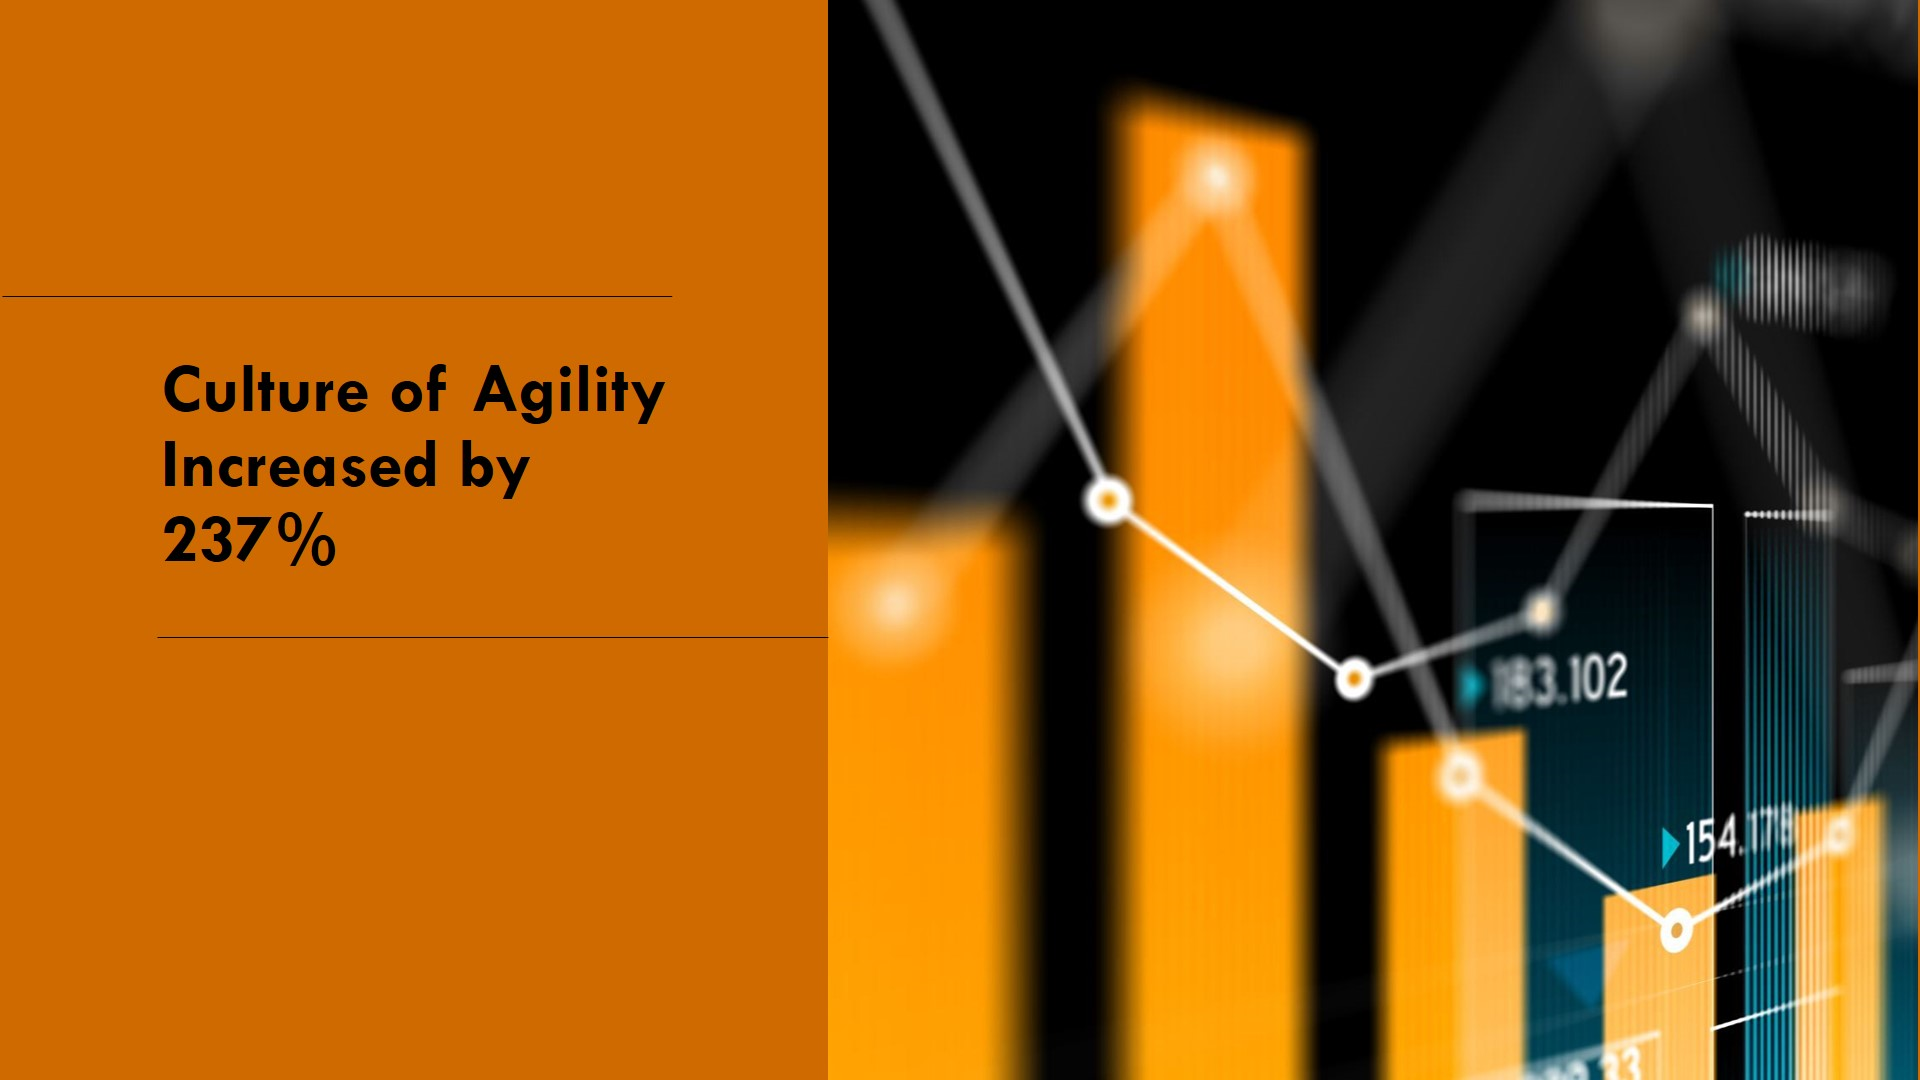 Increase in Culture of Agility